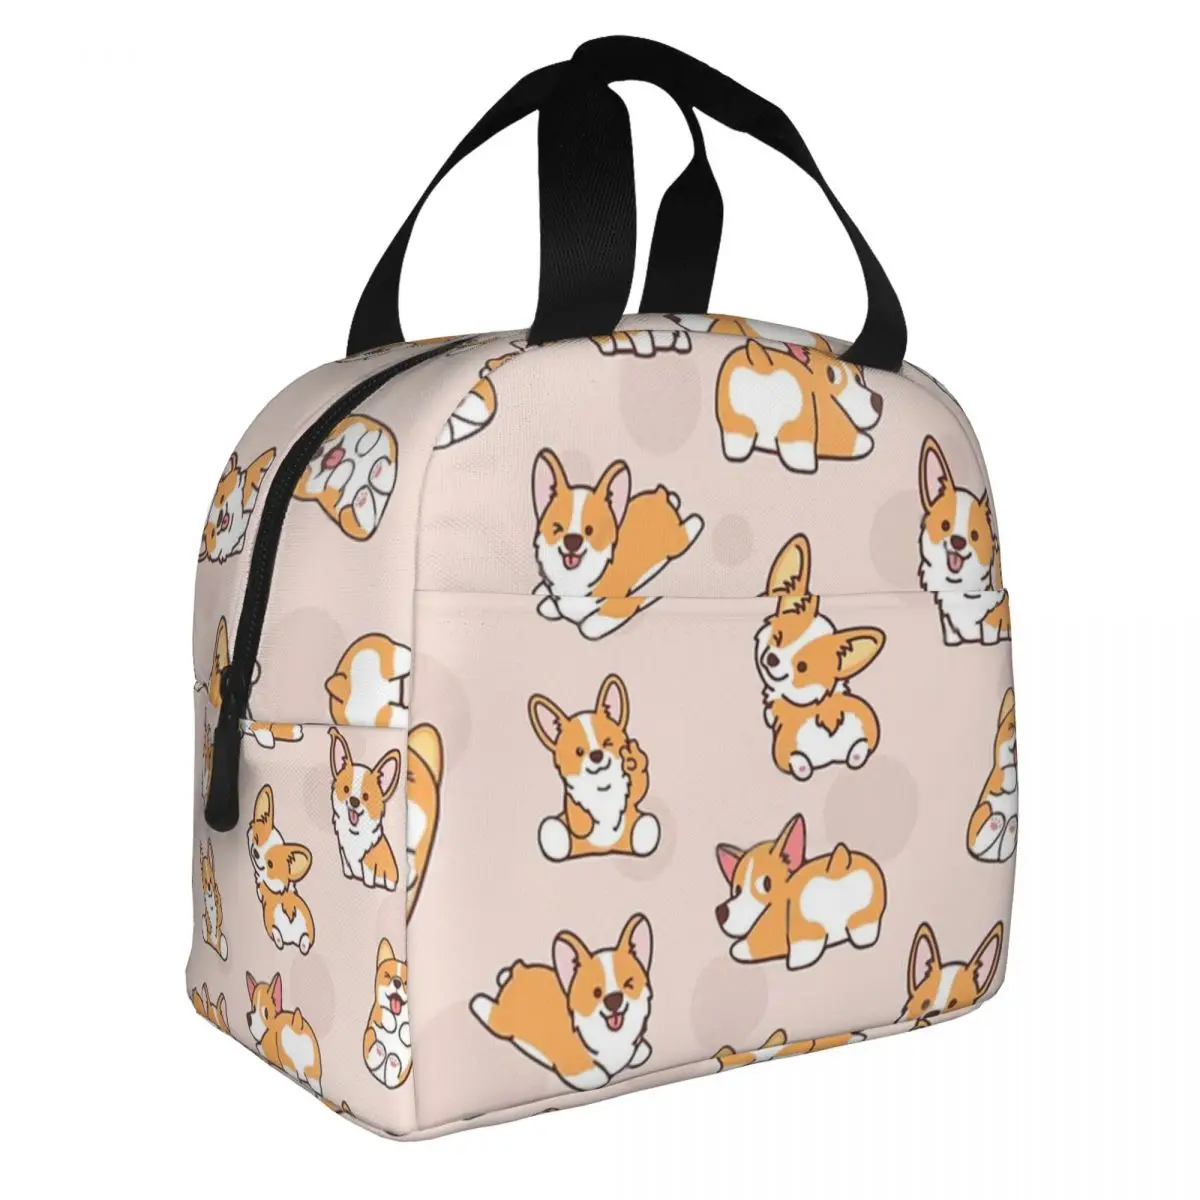 Corgi Puppy Fun Lunch Bento Bags Portable Aluminum Foil thickened Thermal Cloth Lunch Bag for Women Men Boy